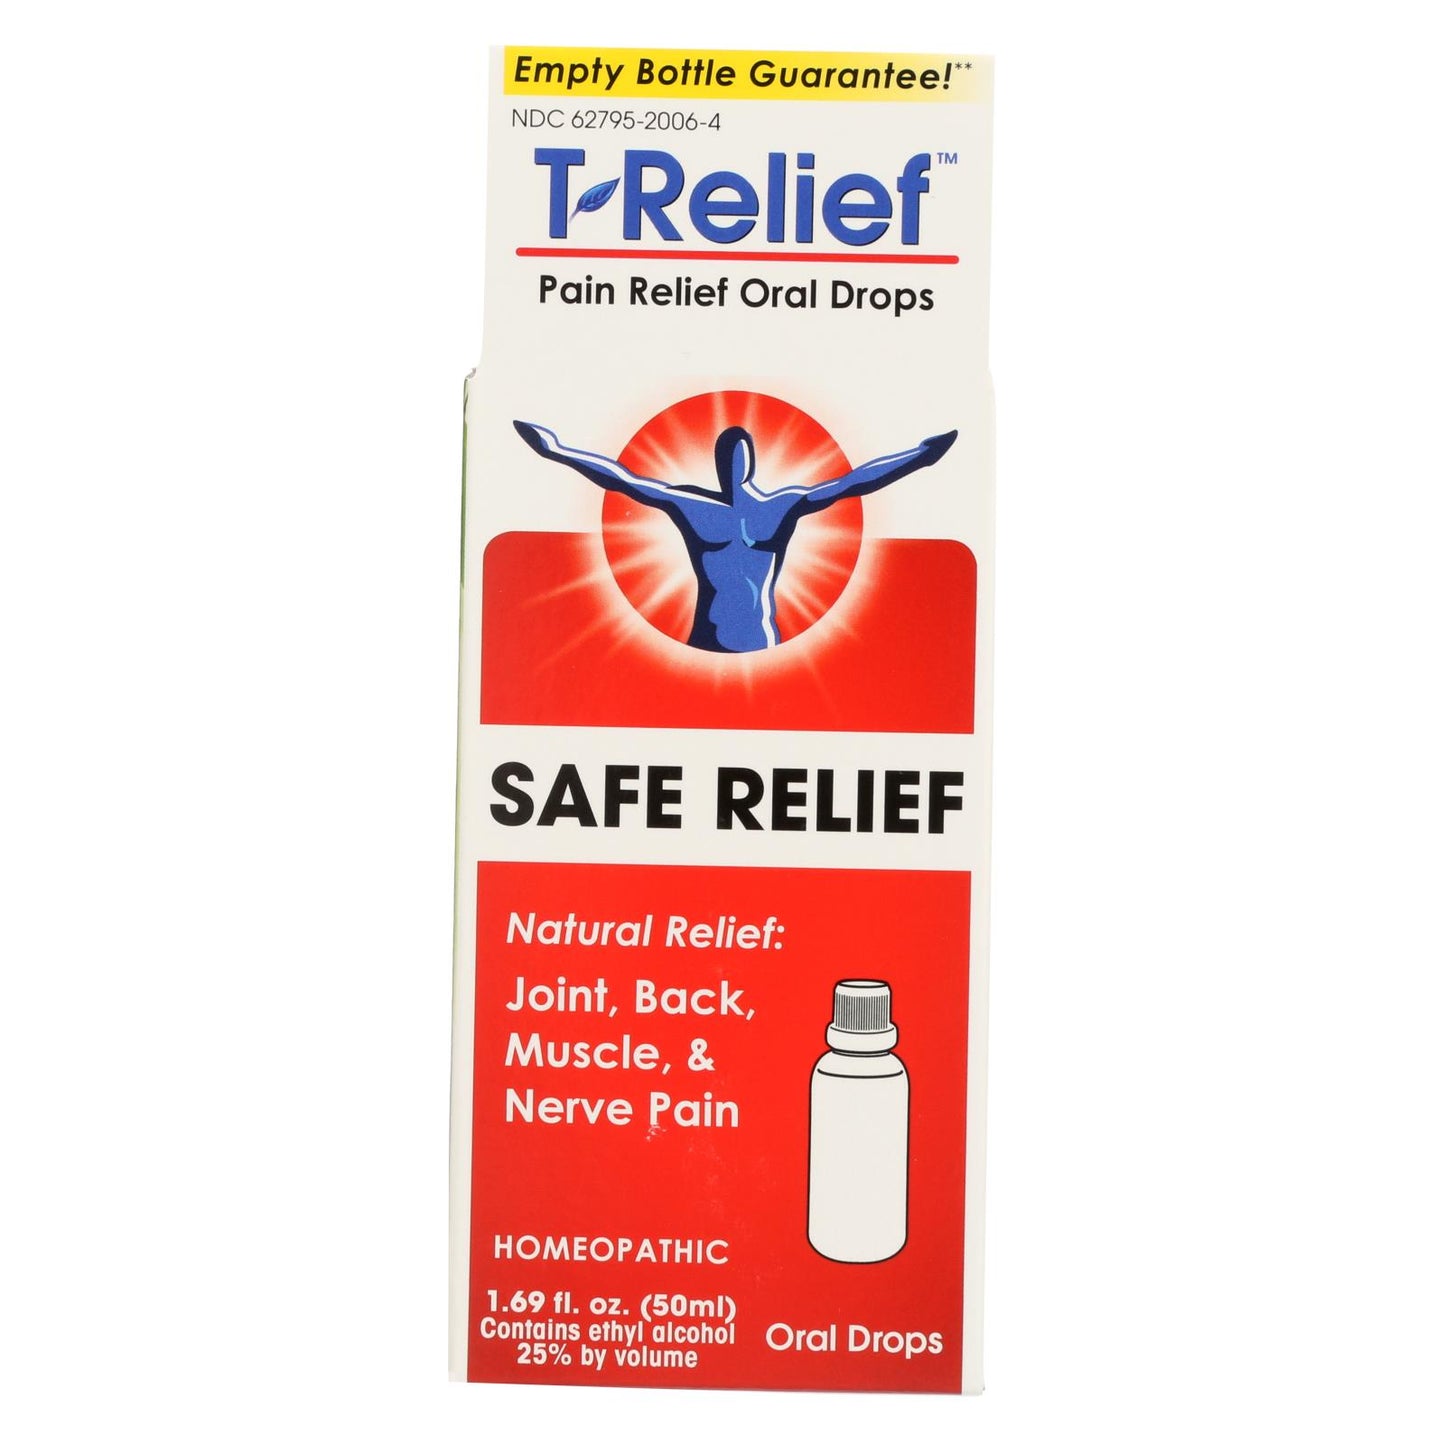 T-relief - Pain Relief Oral Drops - Arnica Plus 12 Natural Ingredients - 1.69 Oz